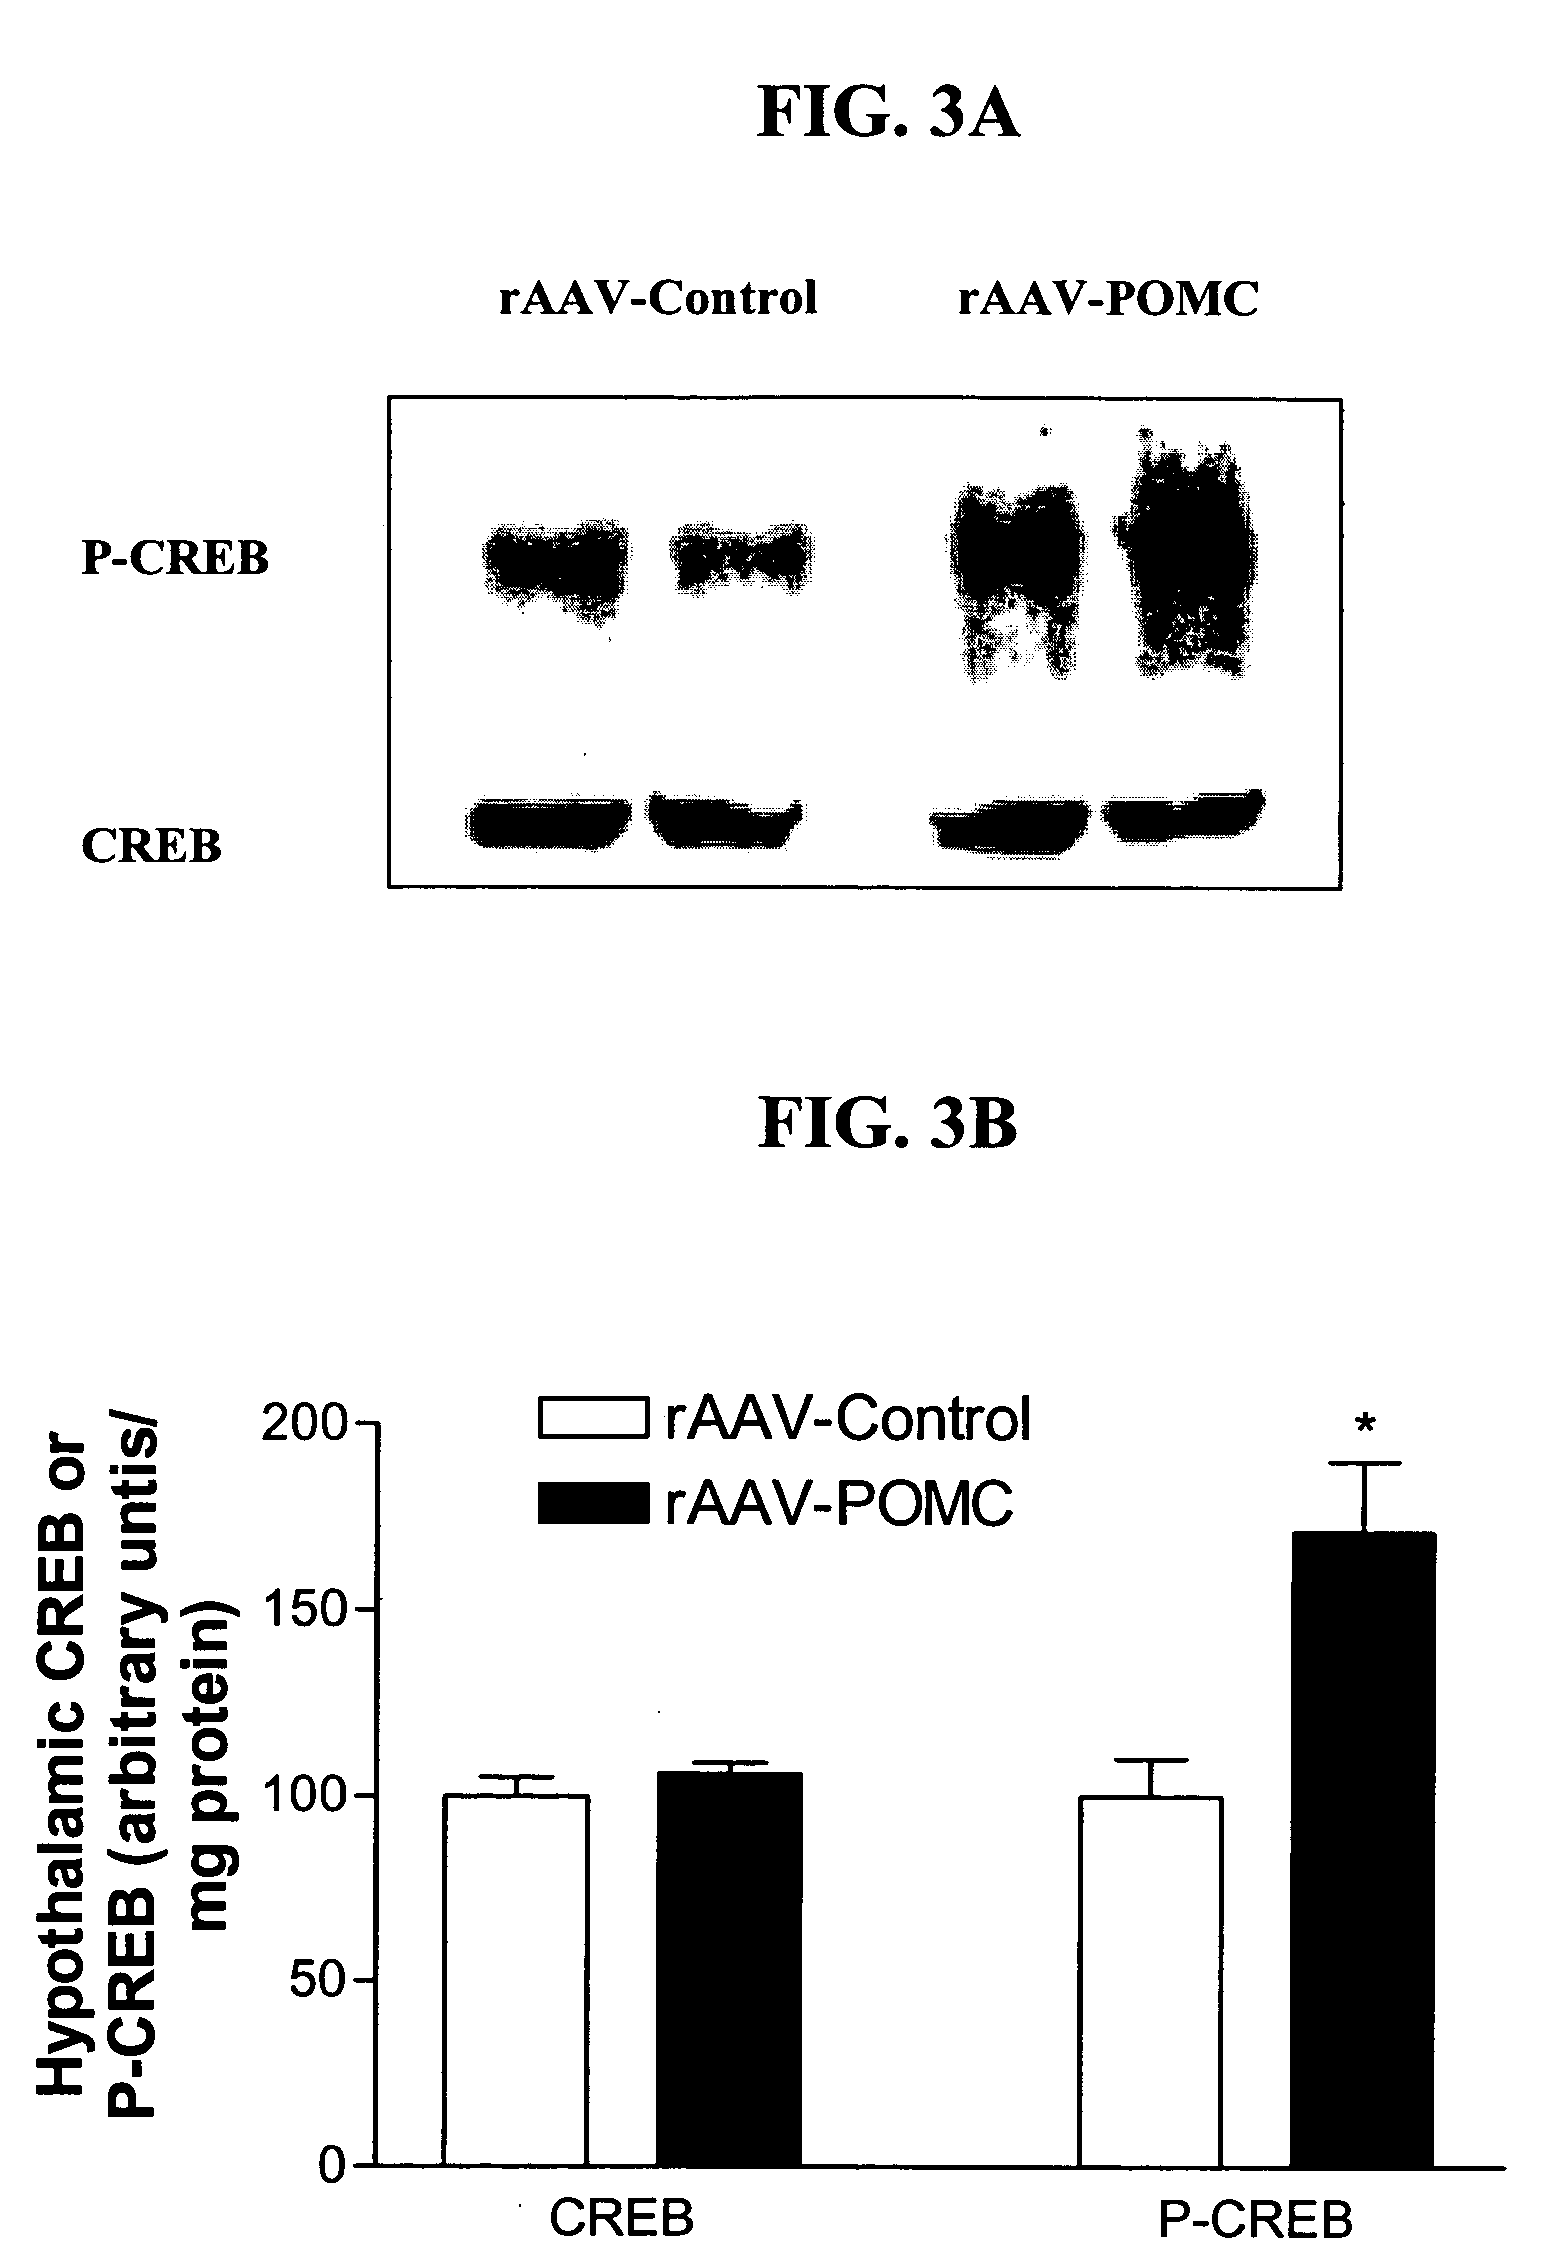 RAAV vector-based pro-opiomelanocortin compositions and methods of use